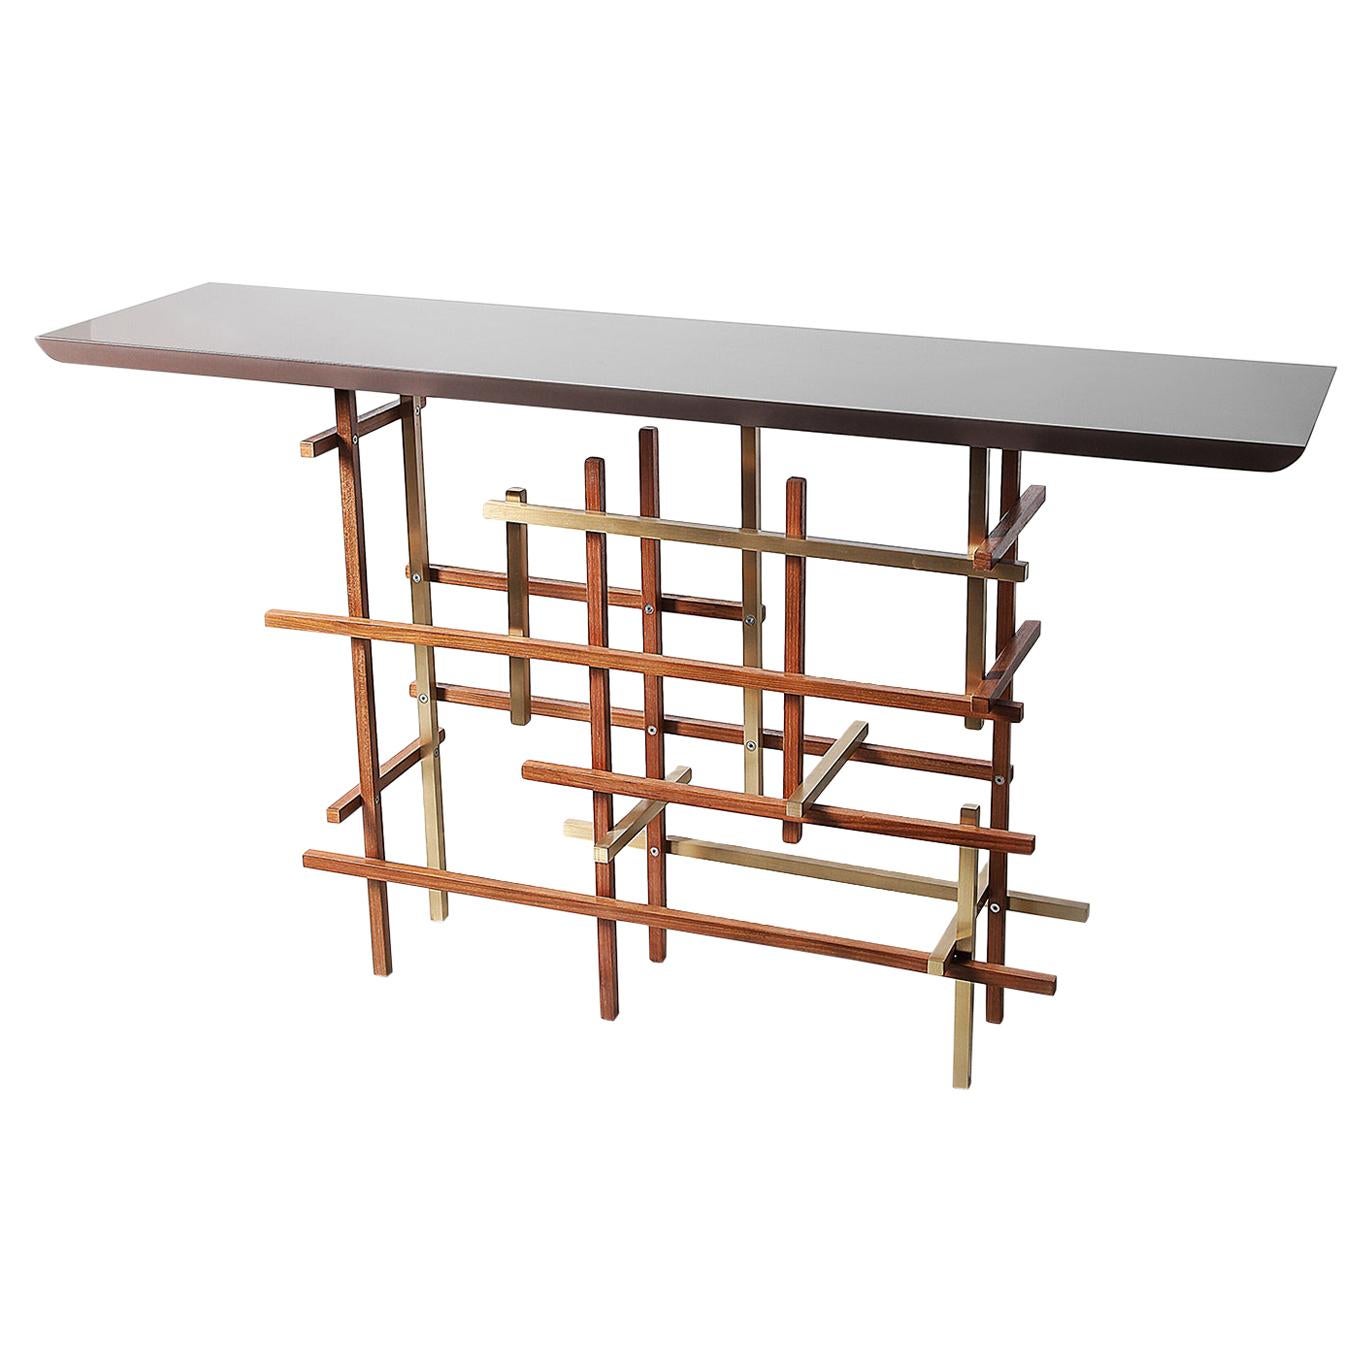 Mikado, Console in High-Gloss Lacquer, Rough Teak Wood and Polished Stainless